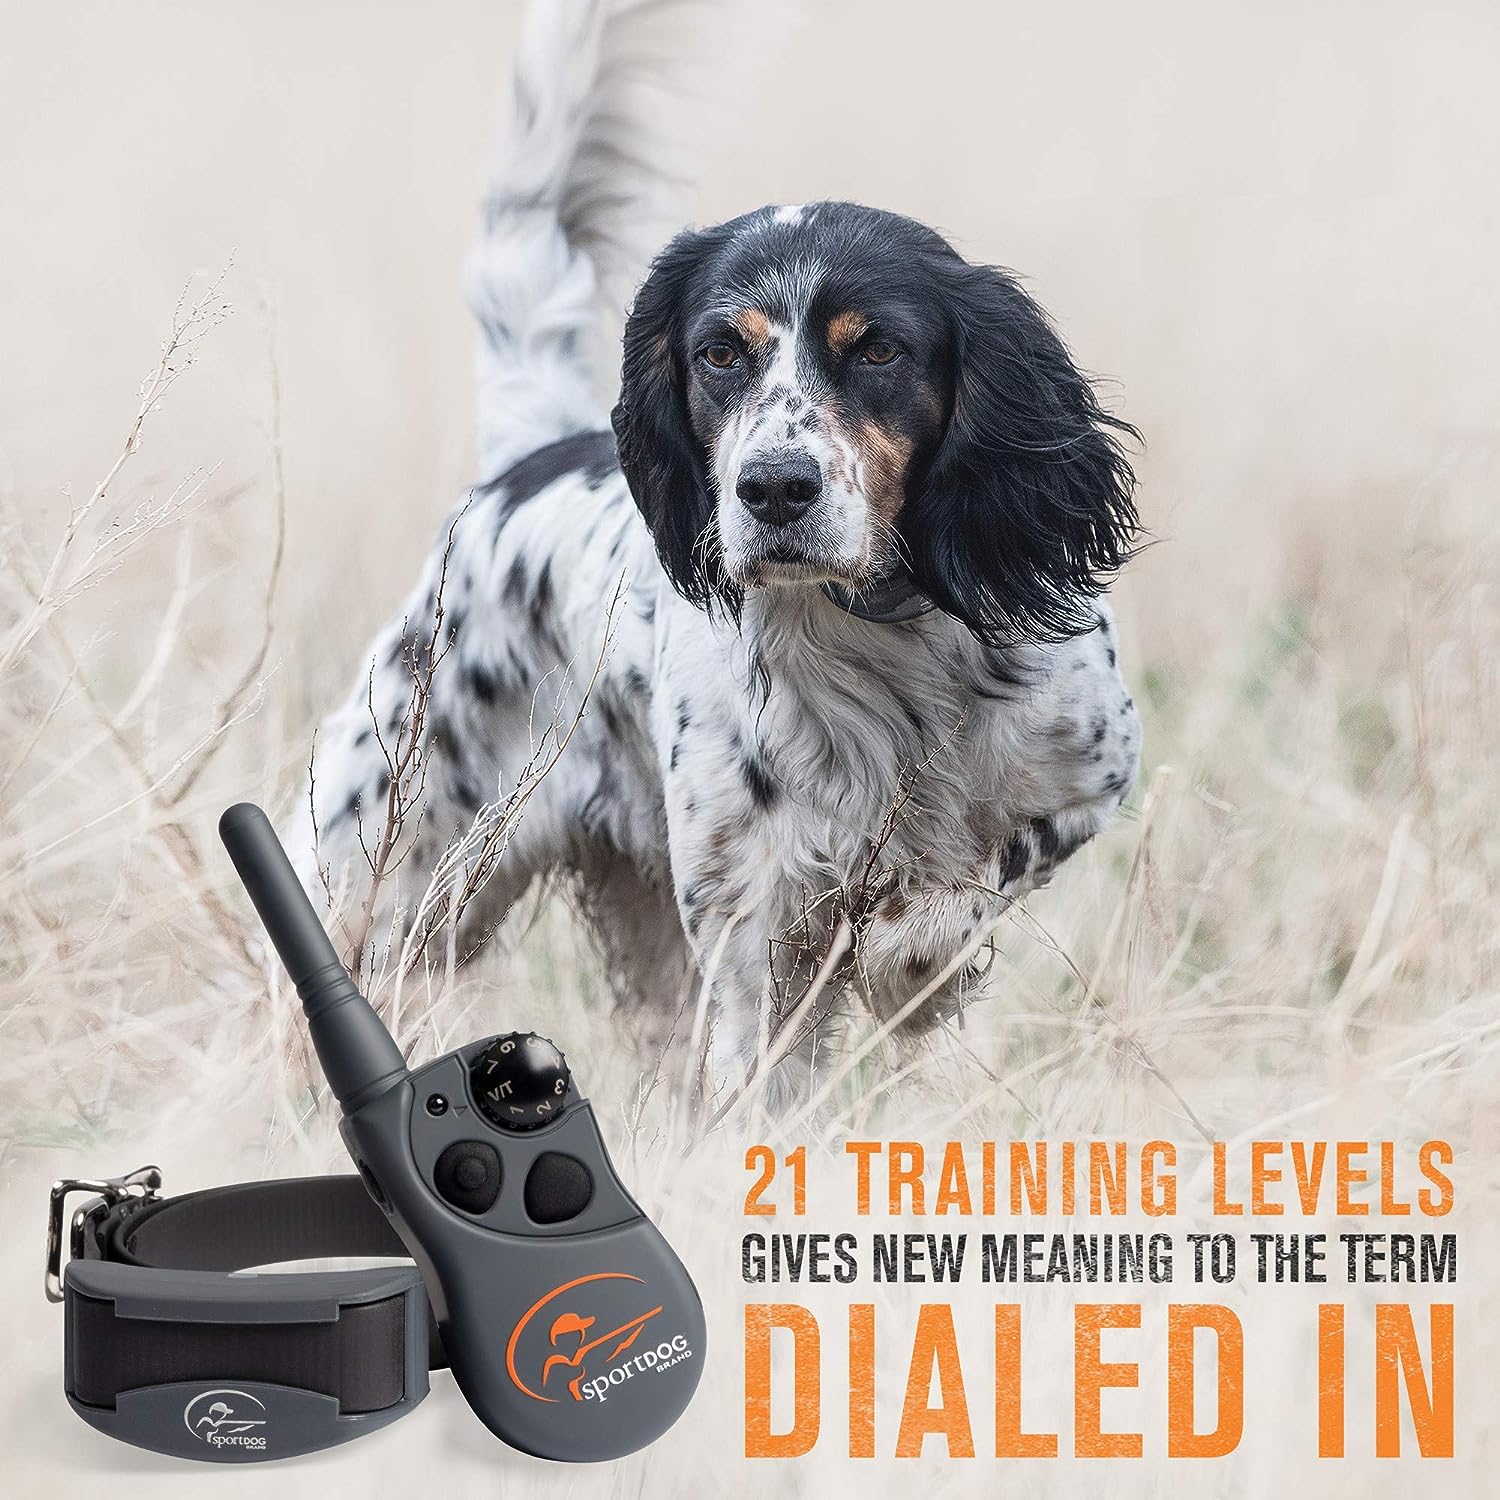 SportDOG SD-425X Electric Training Dog Shock Collar with Remote for Small, Medium, and Large Dogs - 500 Yard Range, Vibration, Tone, Up to 21 Stimulation Levels, Waterproof, Rechargeable E-Collar